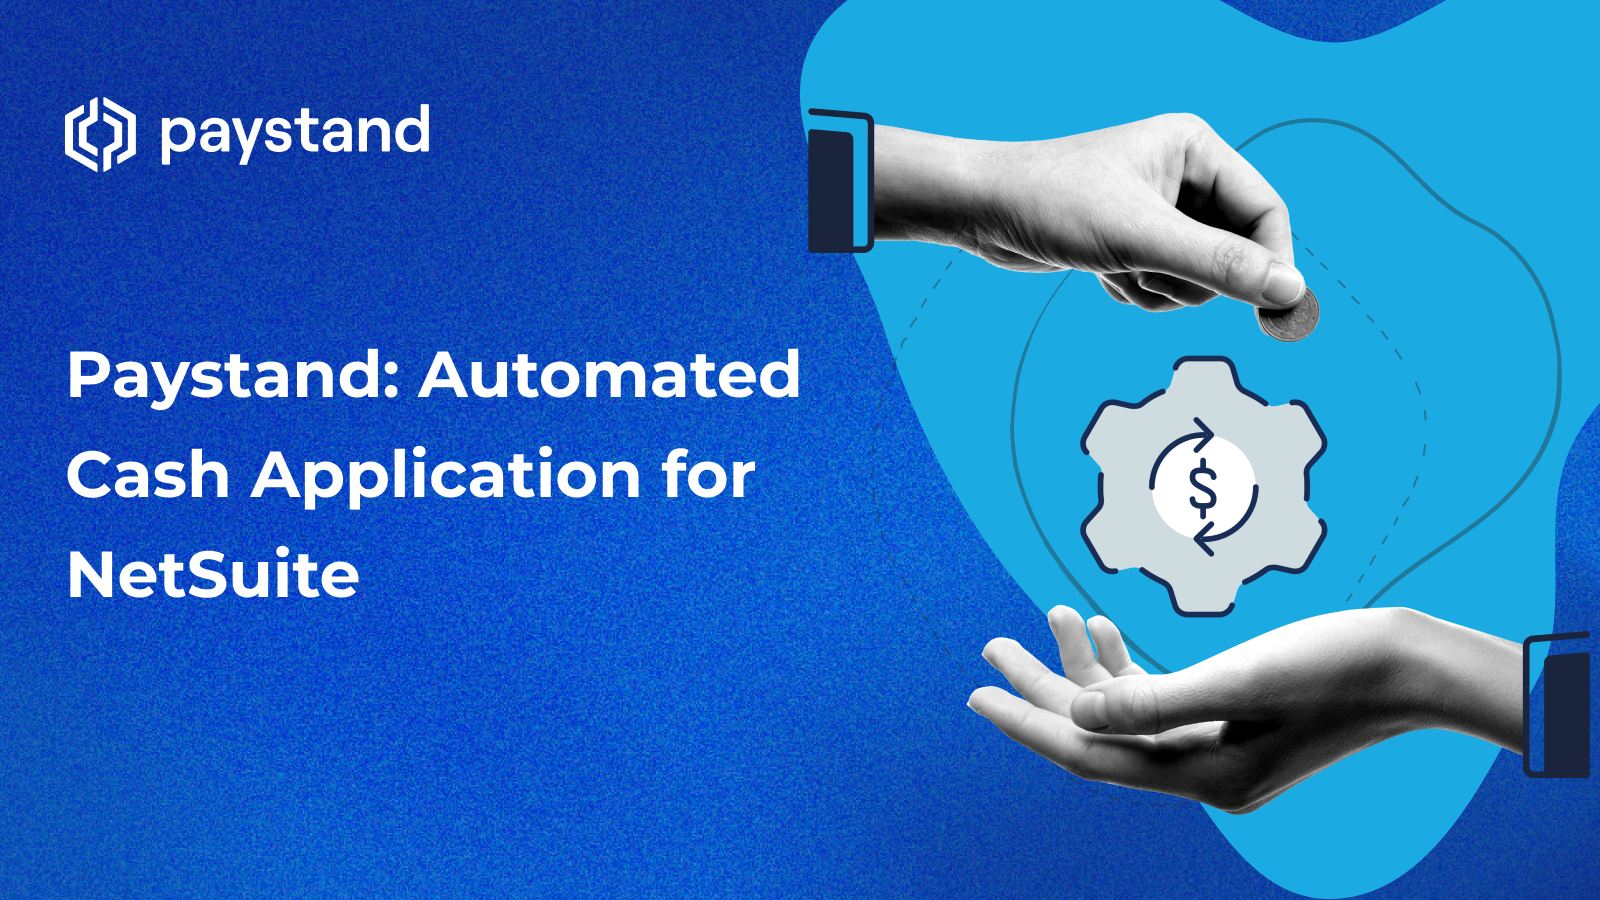 Paystand: Automated Cash Application for NetSuite